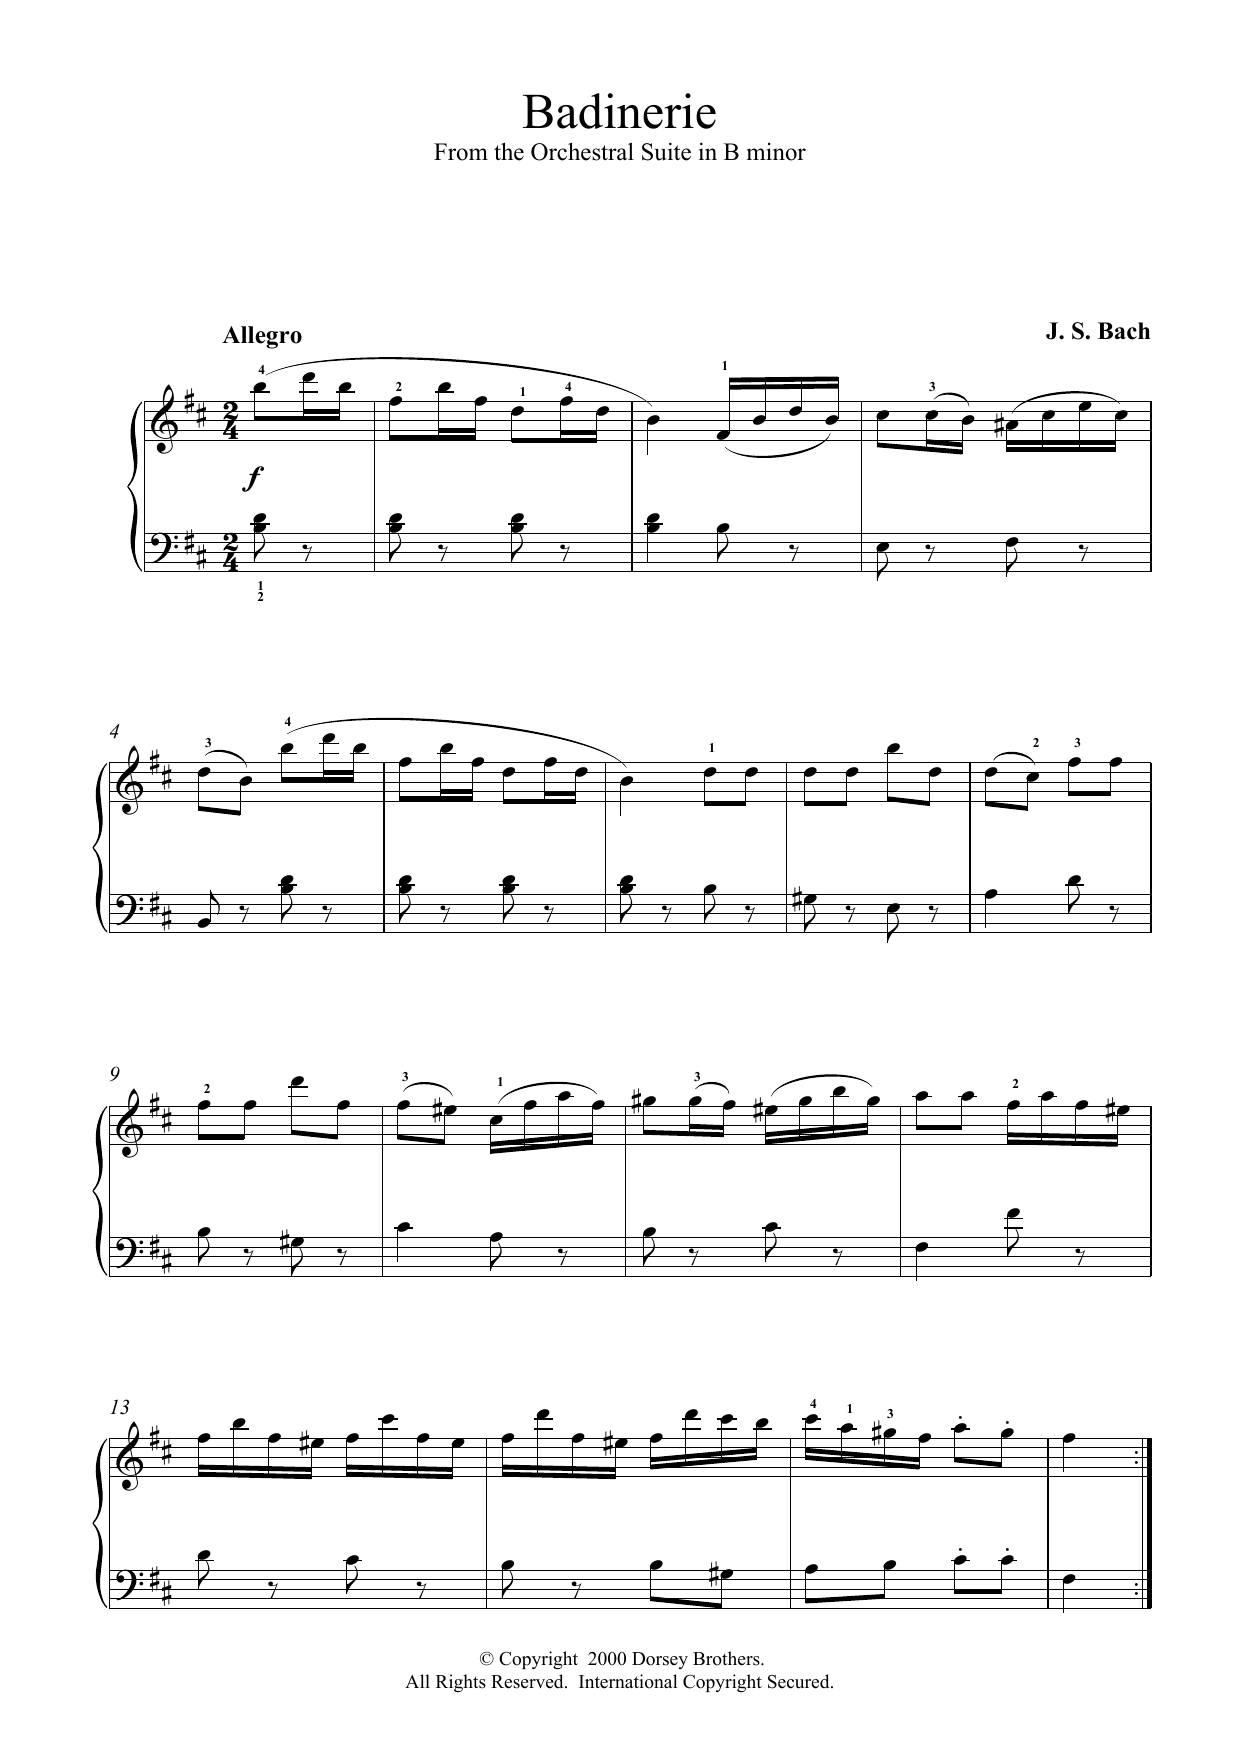 Johann Sebastian Bach Badinerie (from Orchestral Suite No. 2 in B Minor) sheet music notes printable PDF score